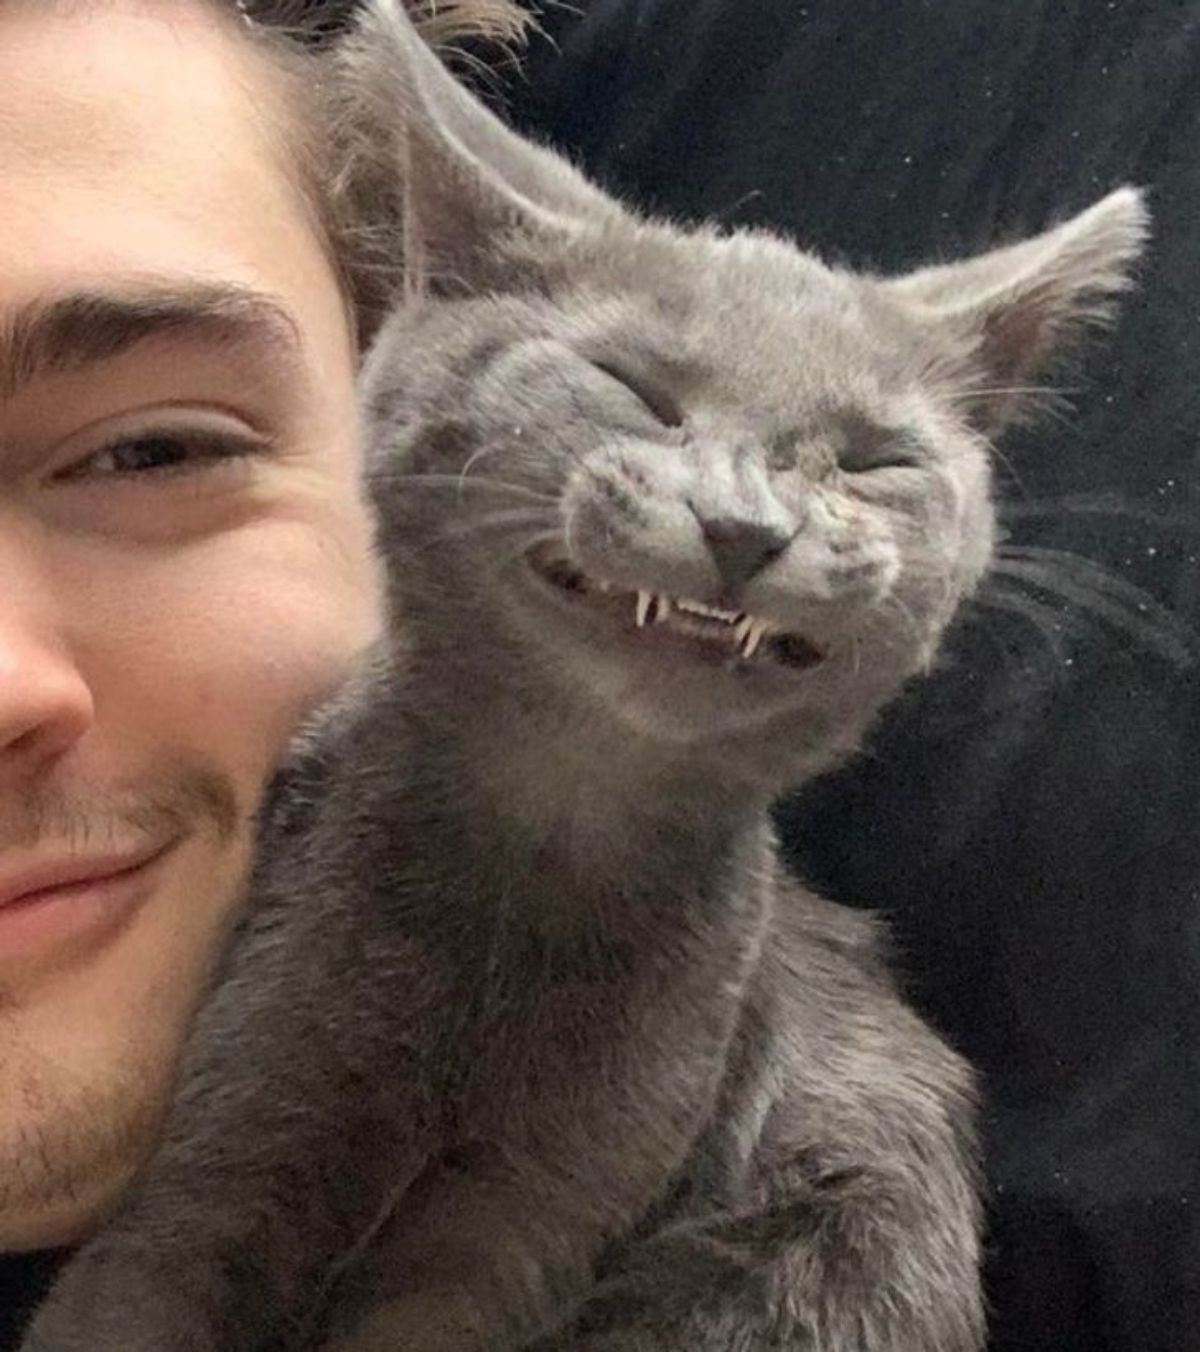 grey cat smiling for camera posing with a man